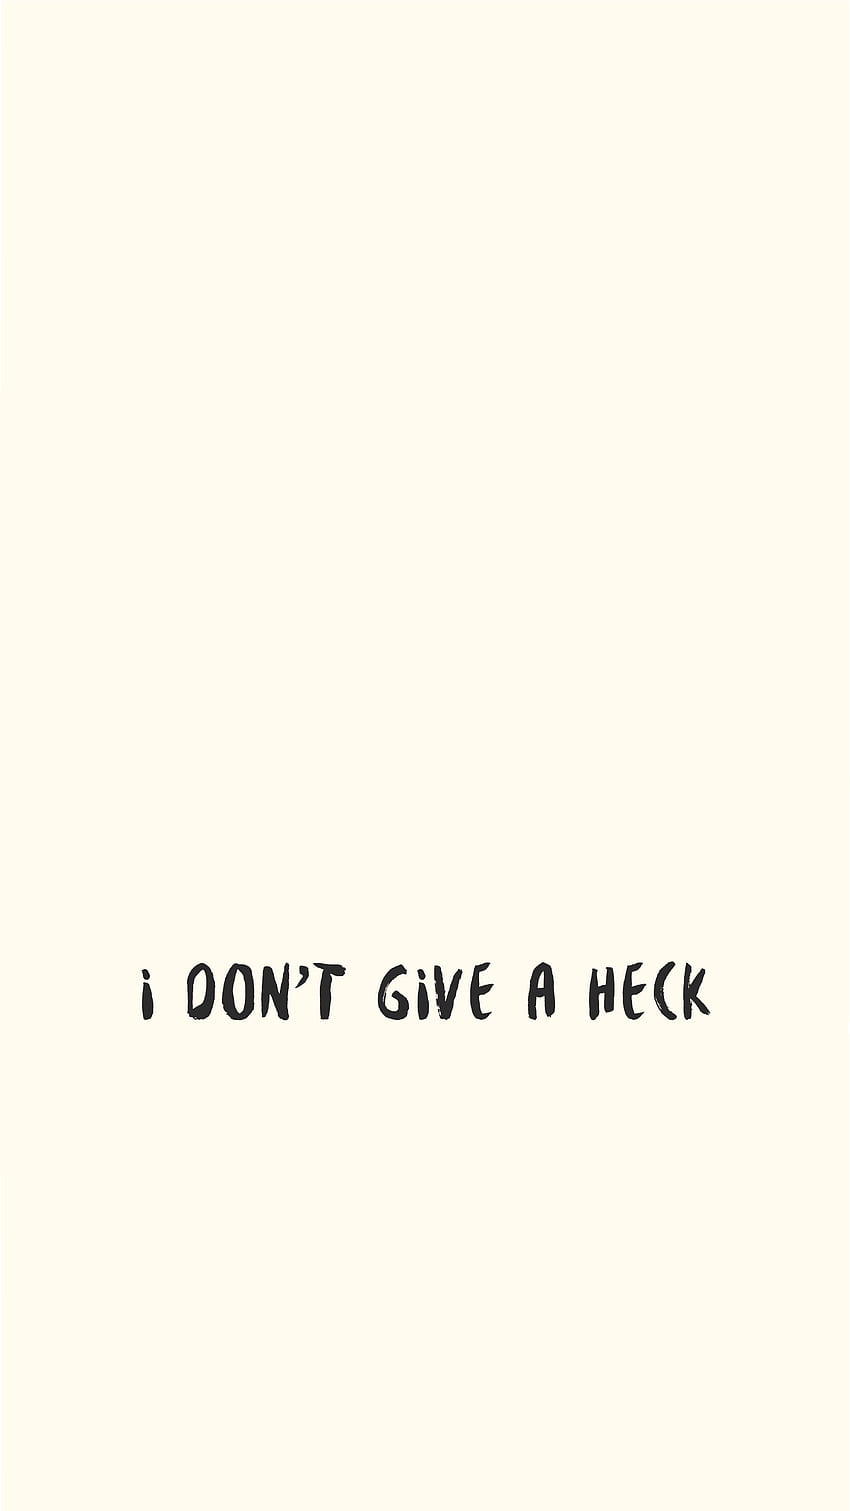 Don't Give a Heck. Phone quotes, iPhone quotes funny, Phone background funny, Funny Sarcastic HD phone wallpaper